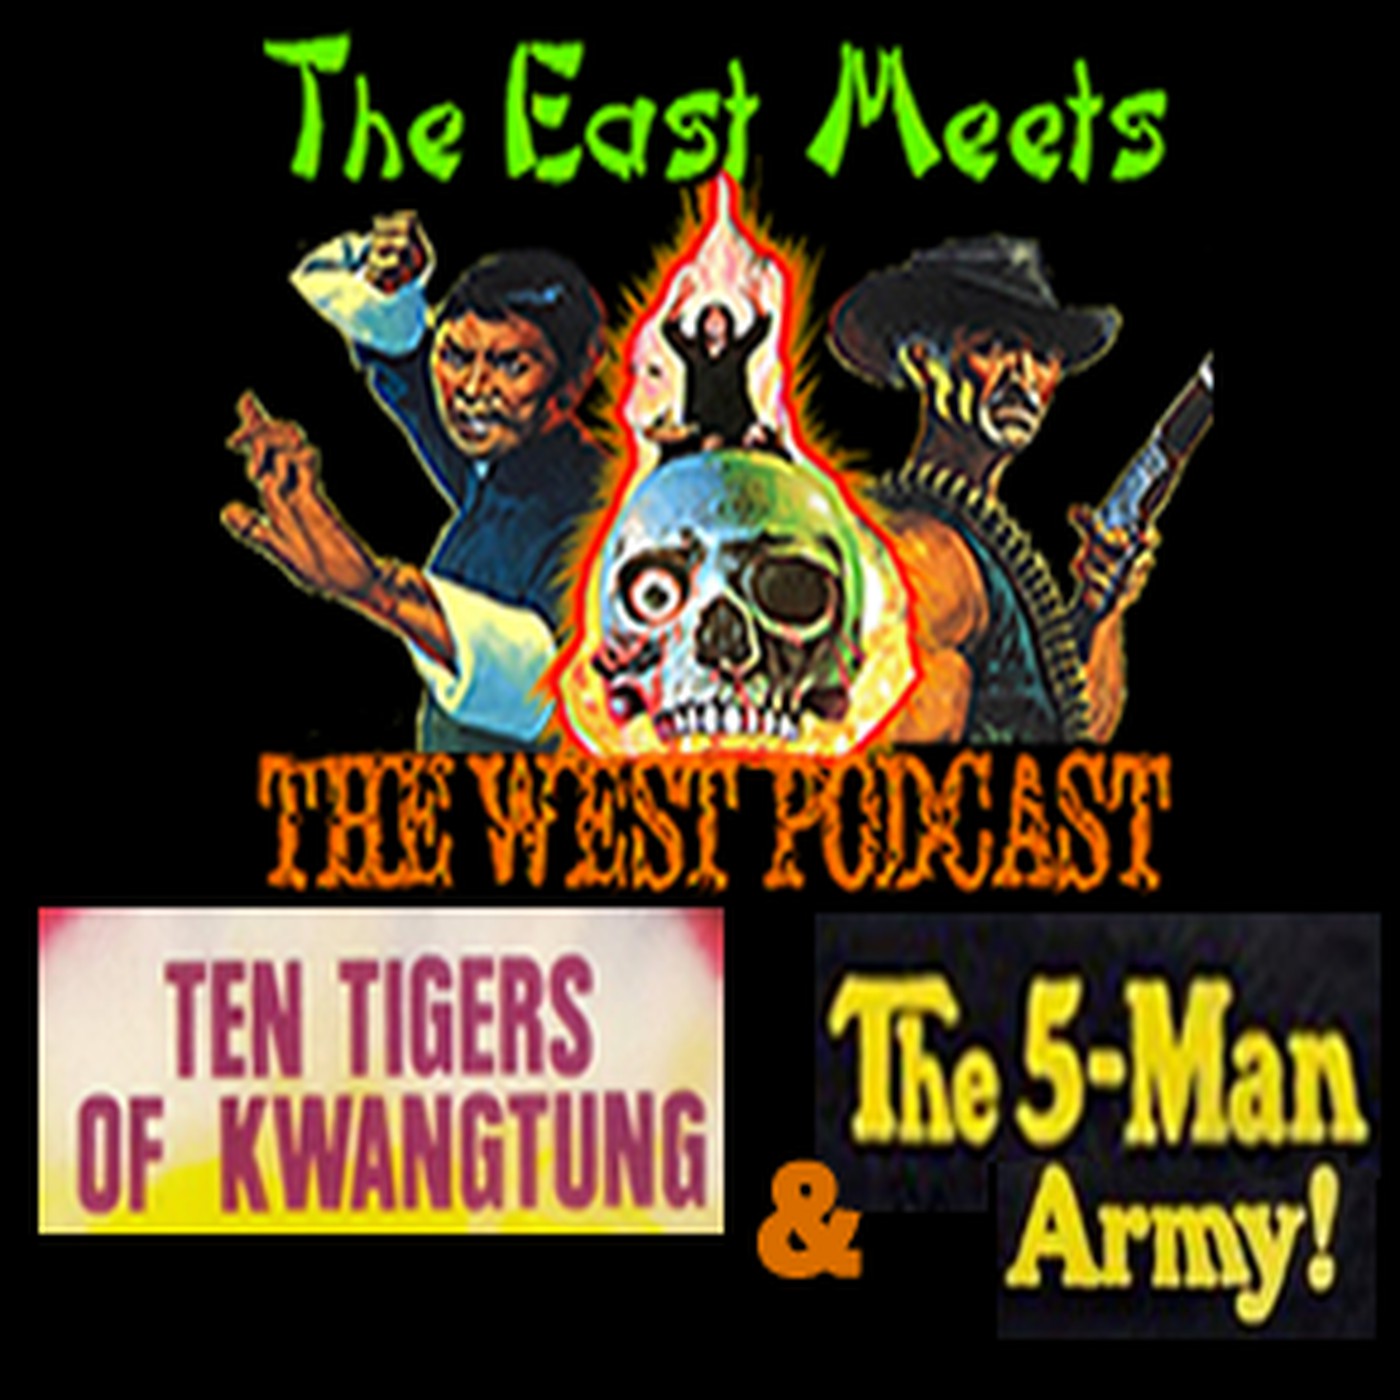 The East Meets the West Ep. 18 - 10 TIGERS OF KWANGTUNG (1980) & THE 5-MAN ARMY (1969)